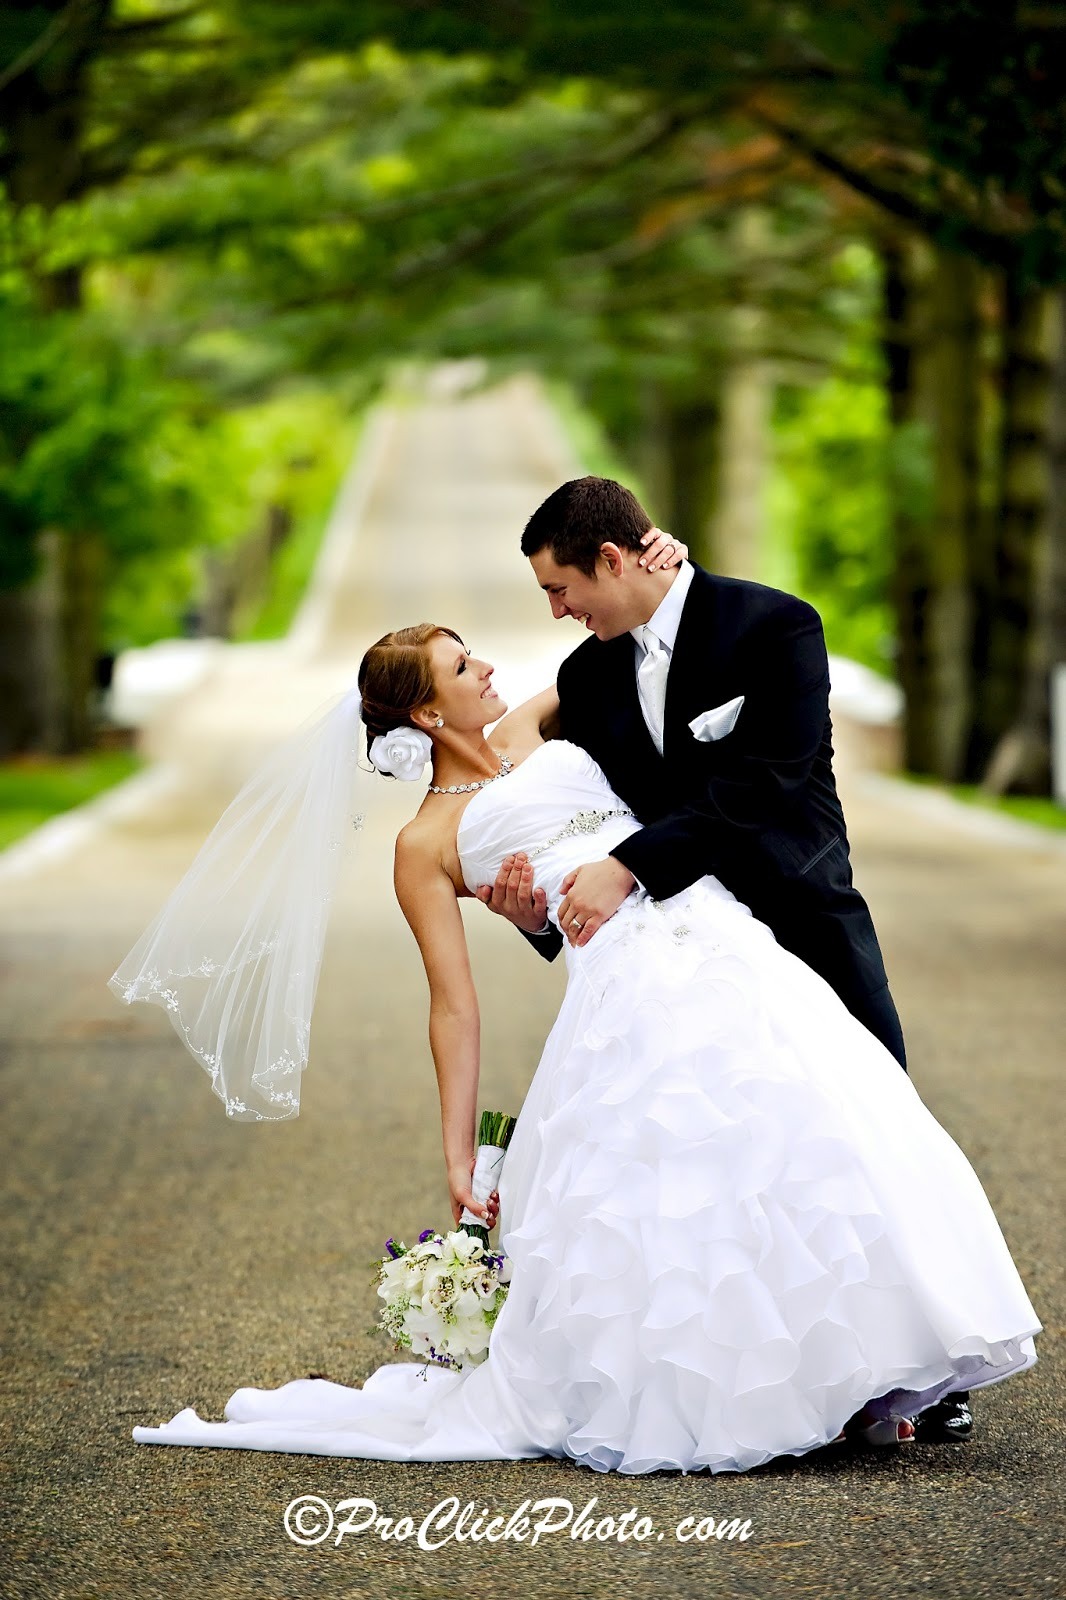 Pro Click Photography, Video, DJ & Photo Booth in Medford NJ